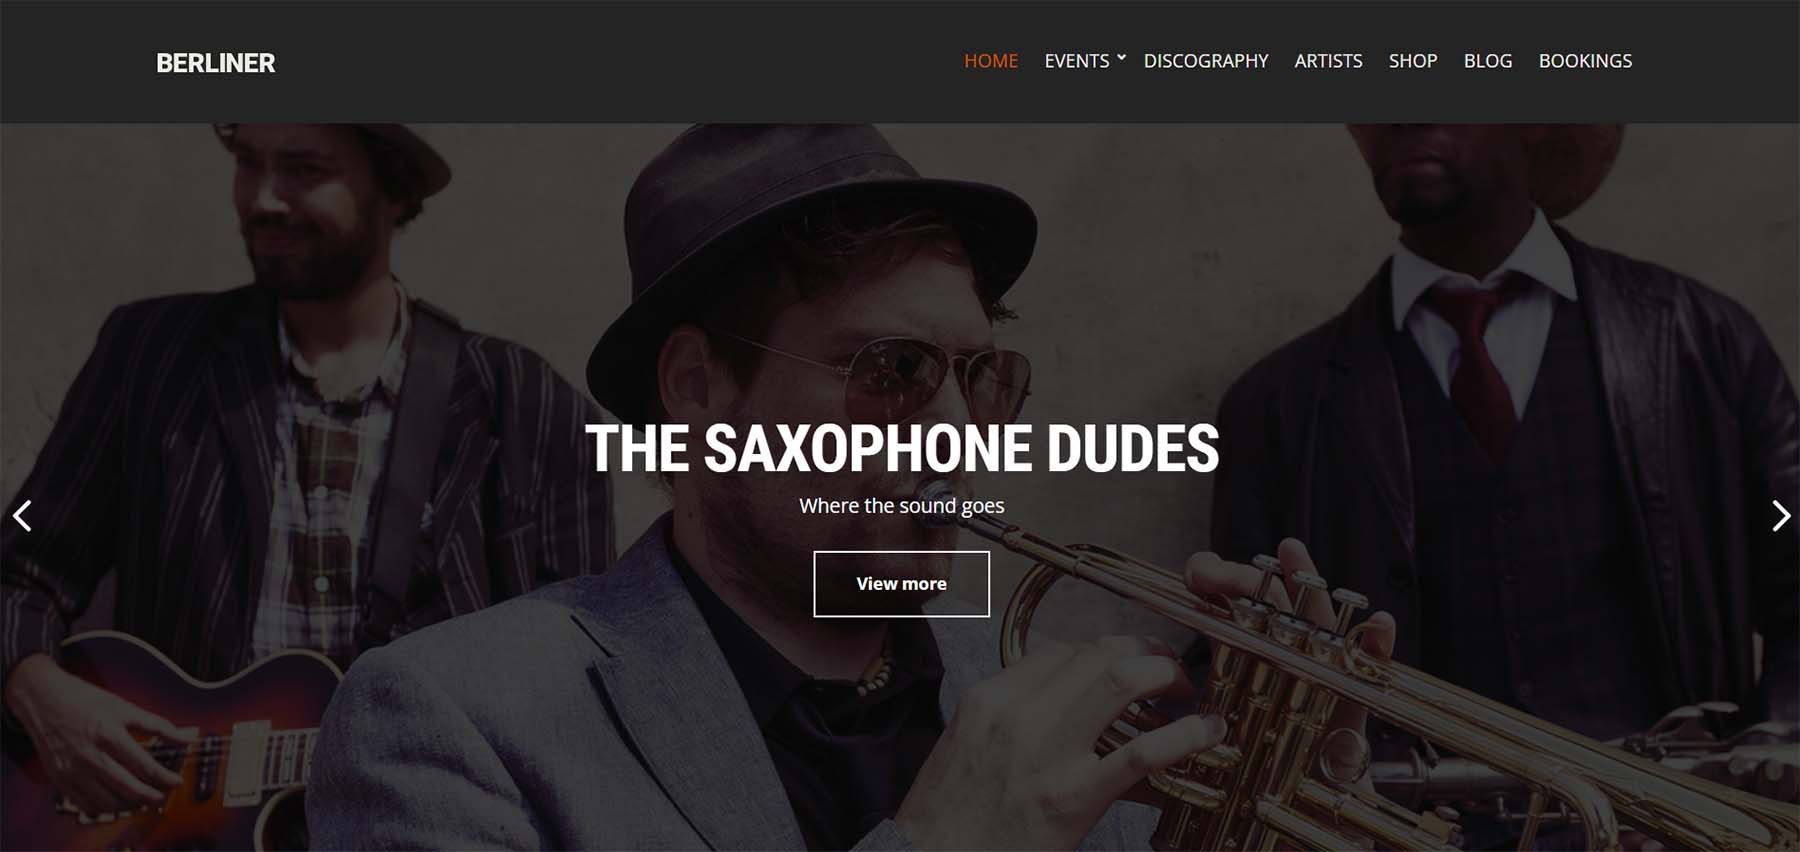 Berliner, a WordPress theme for musicians and bands